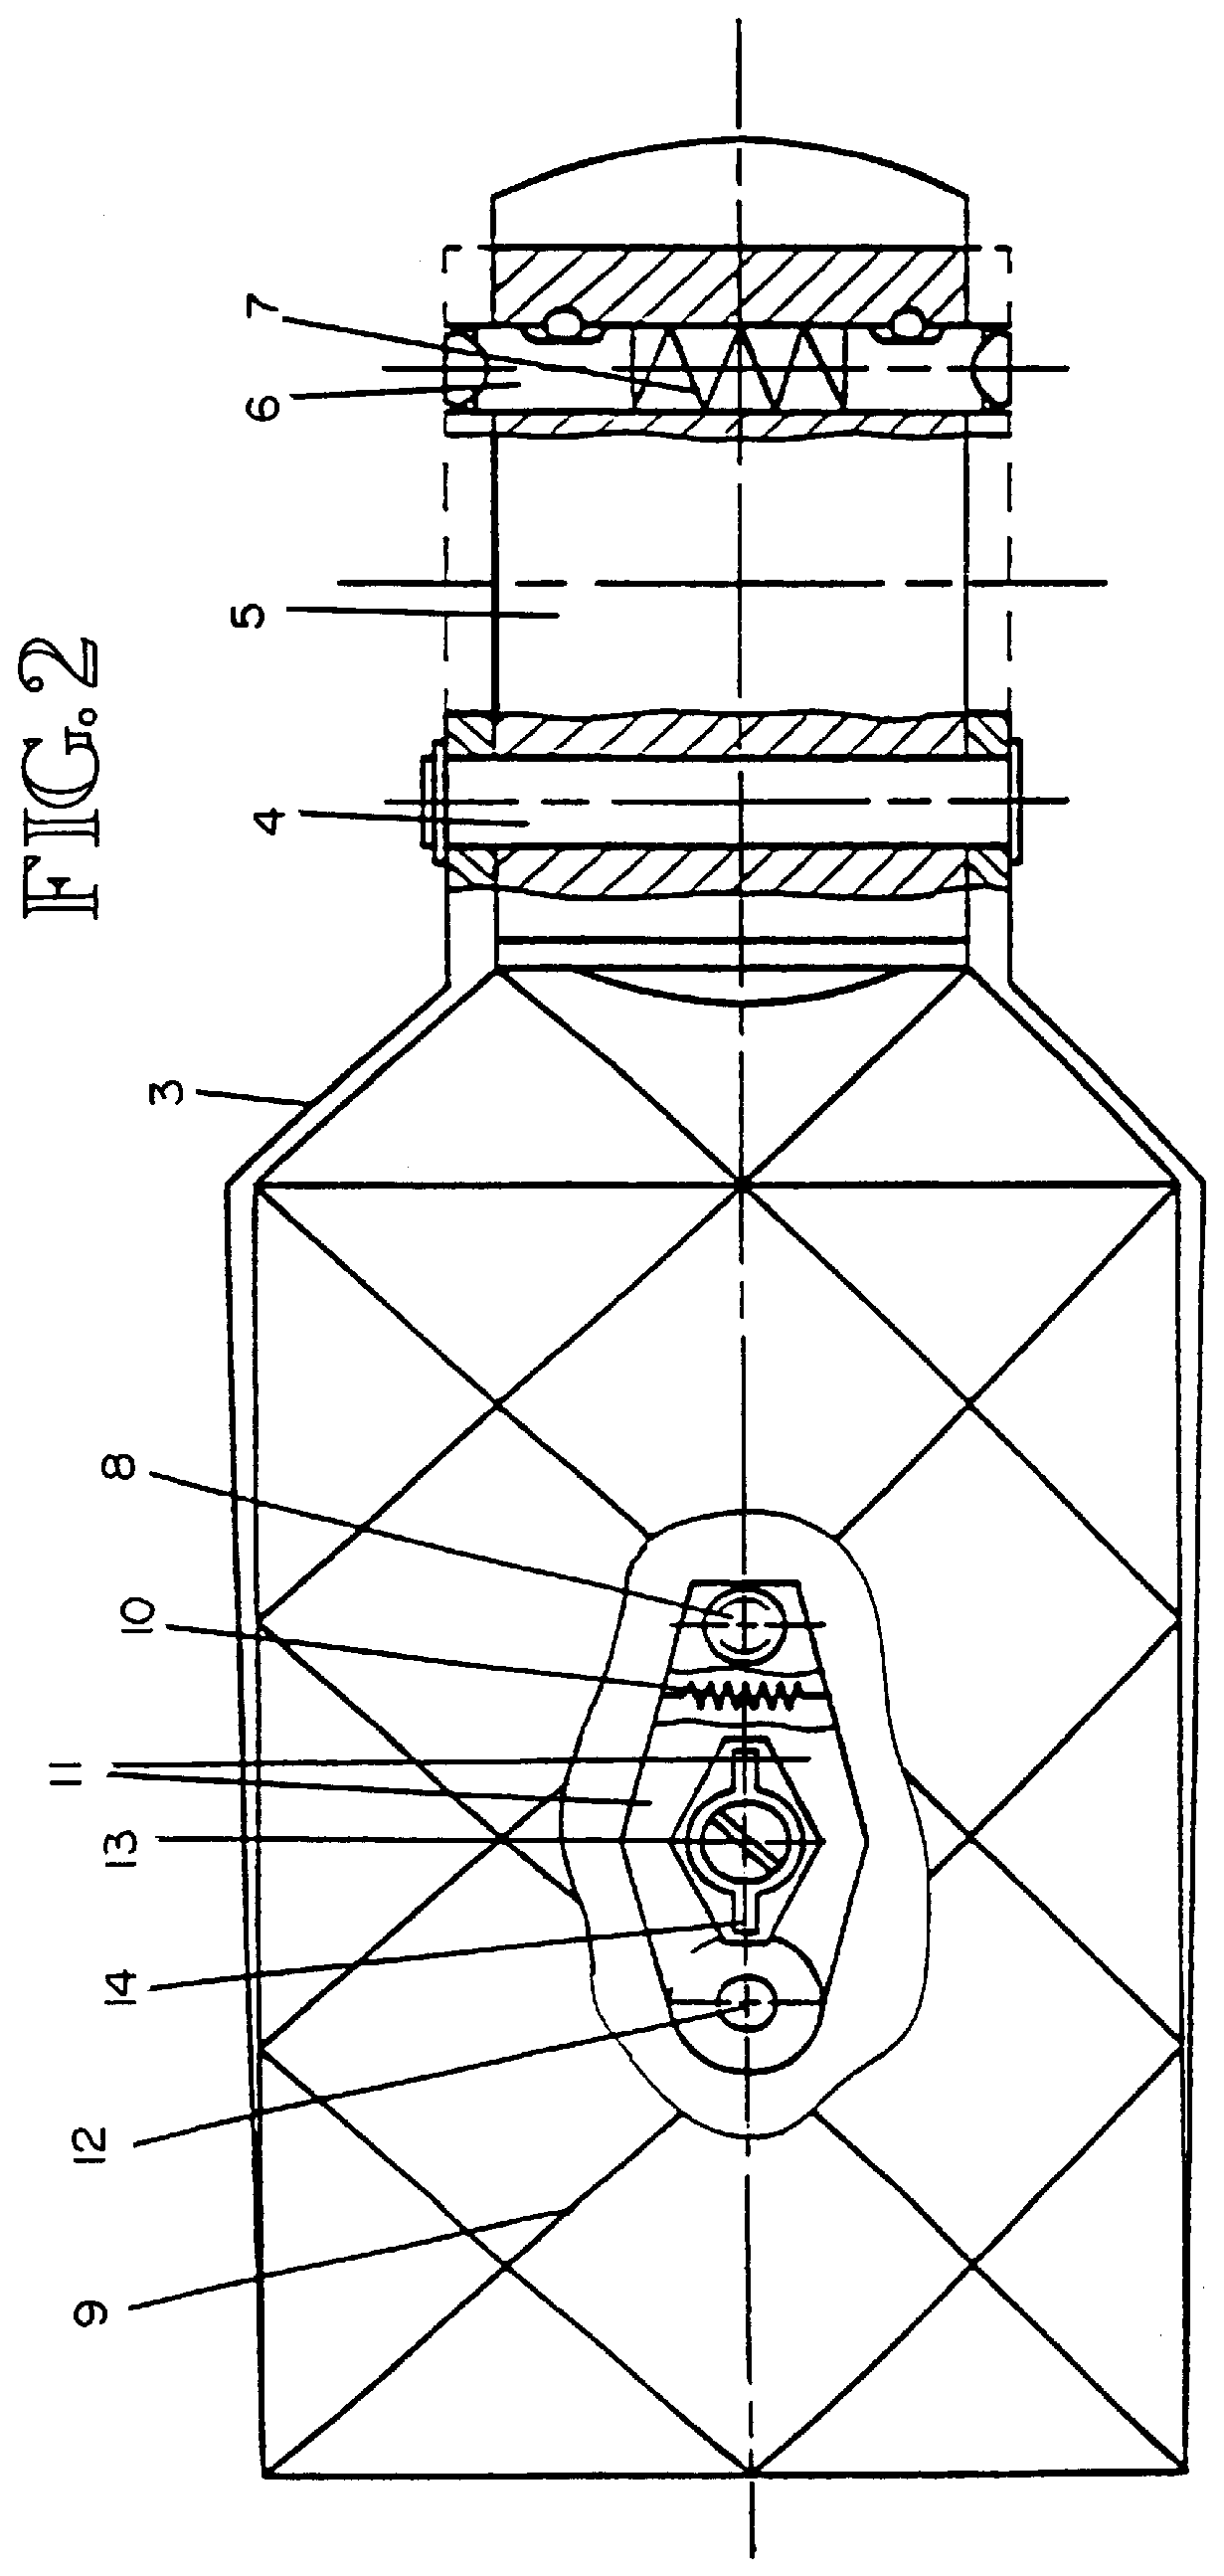 Rocket with lattice control surfaces and a lattice control surface for a rocket